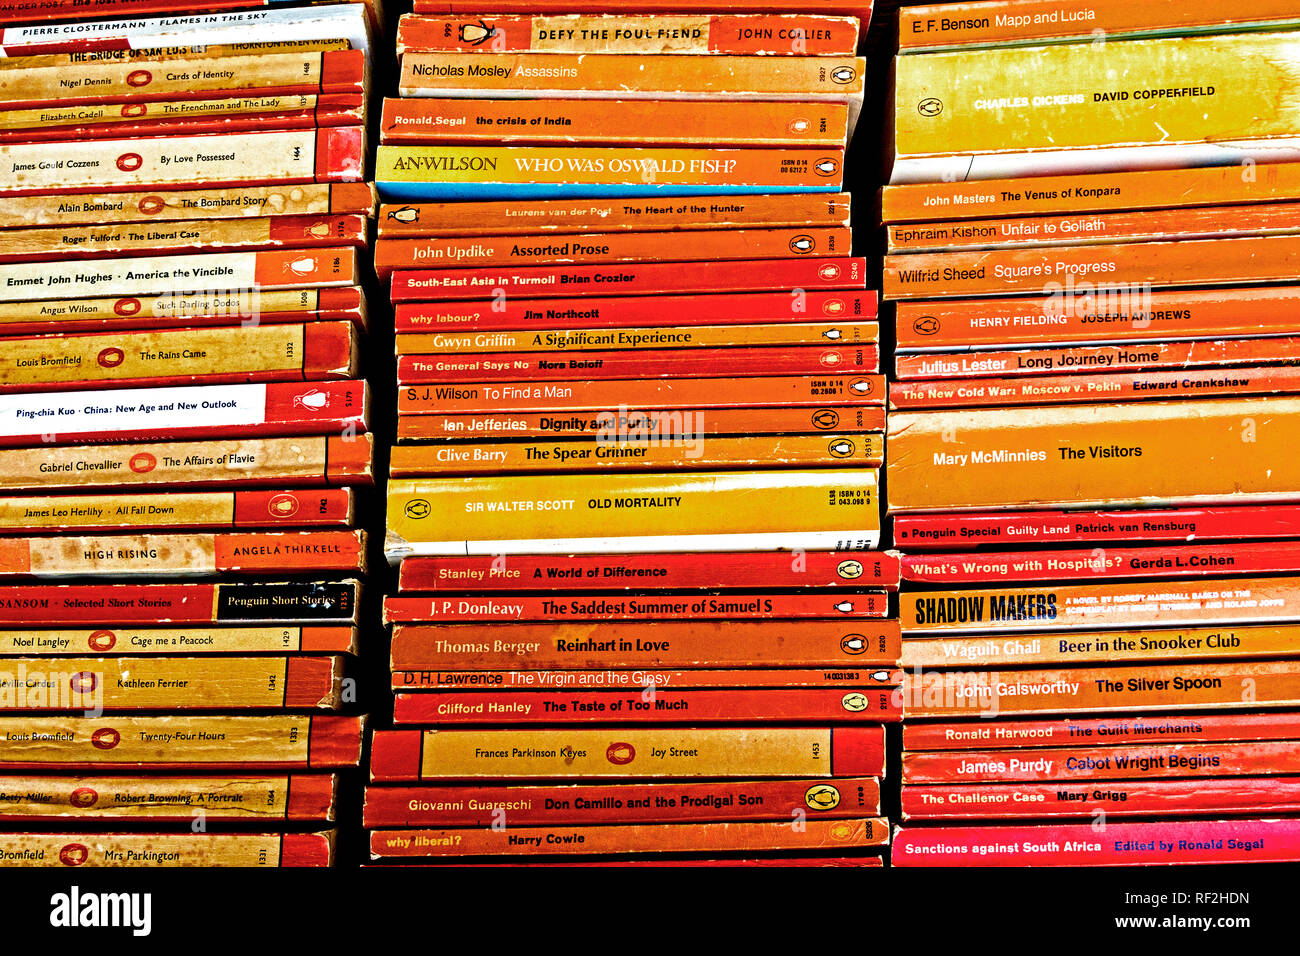 Stacks of Penguin Books in front of a Bookshop Stock Photo